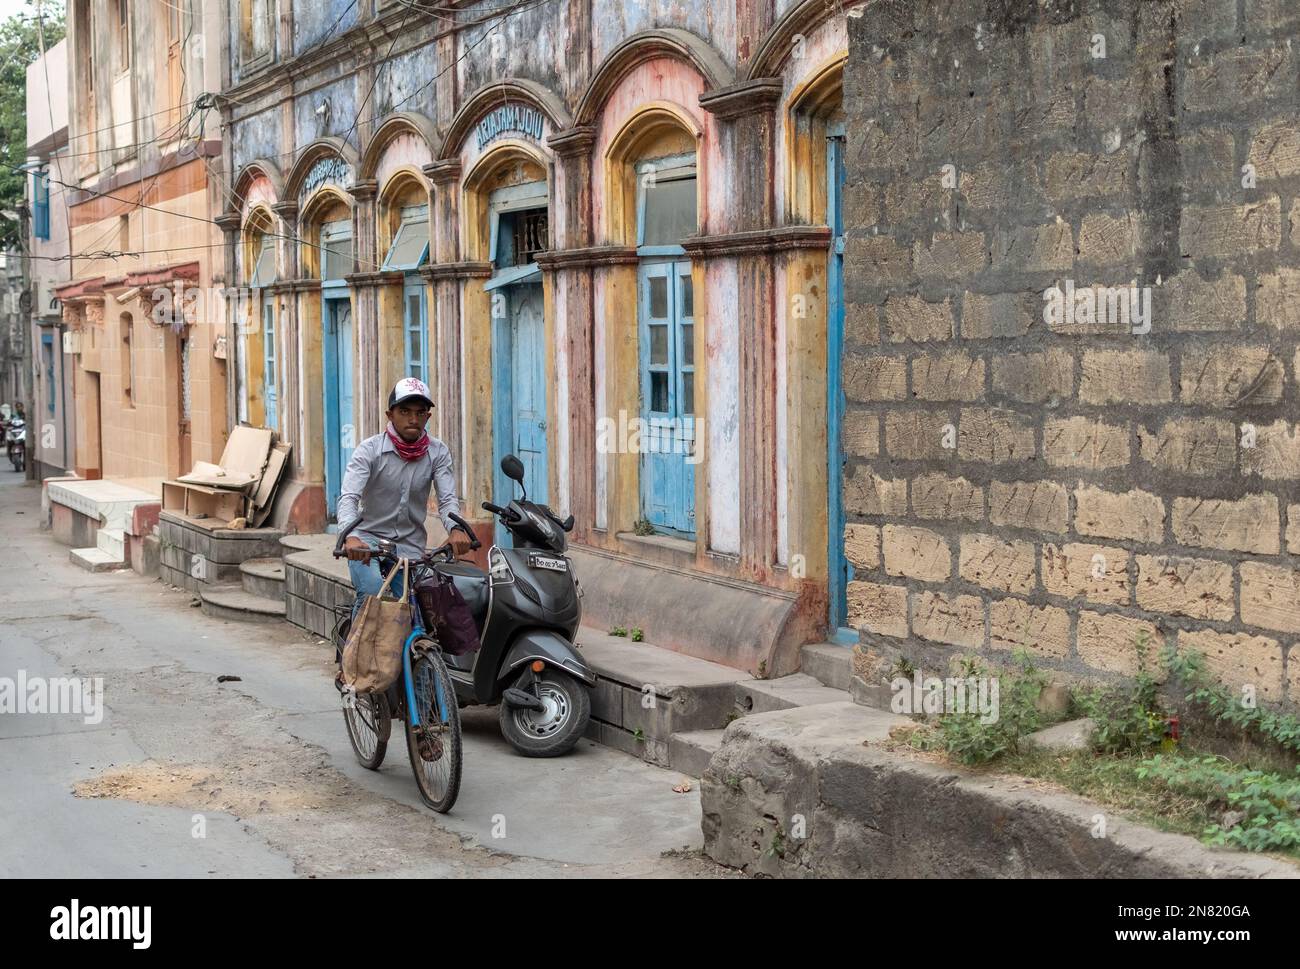 Diu, India - December 2018: A young man riding a bicycle on a street with old Portuguese era houses in the island town of Diu. Stock Photo